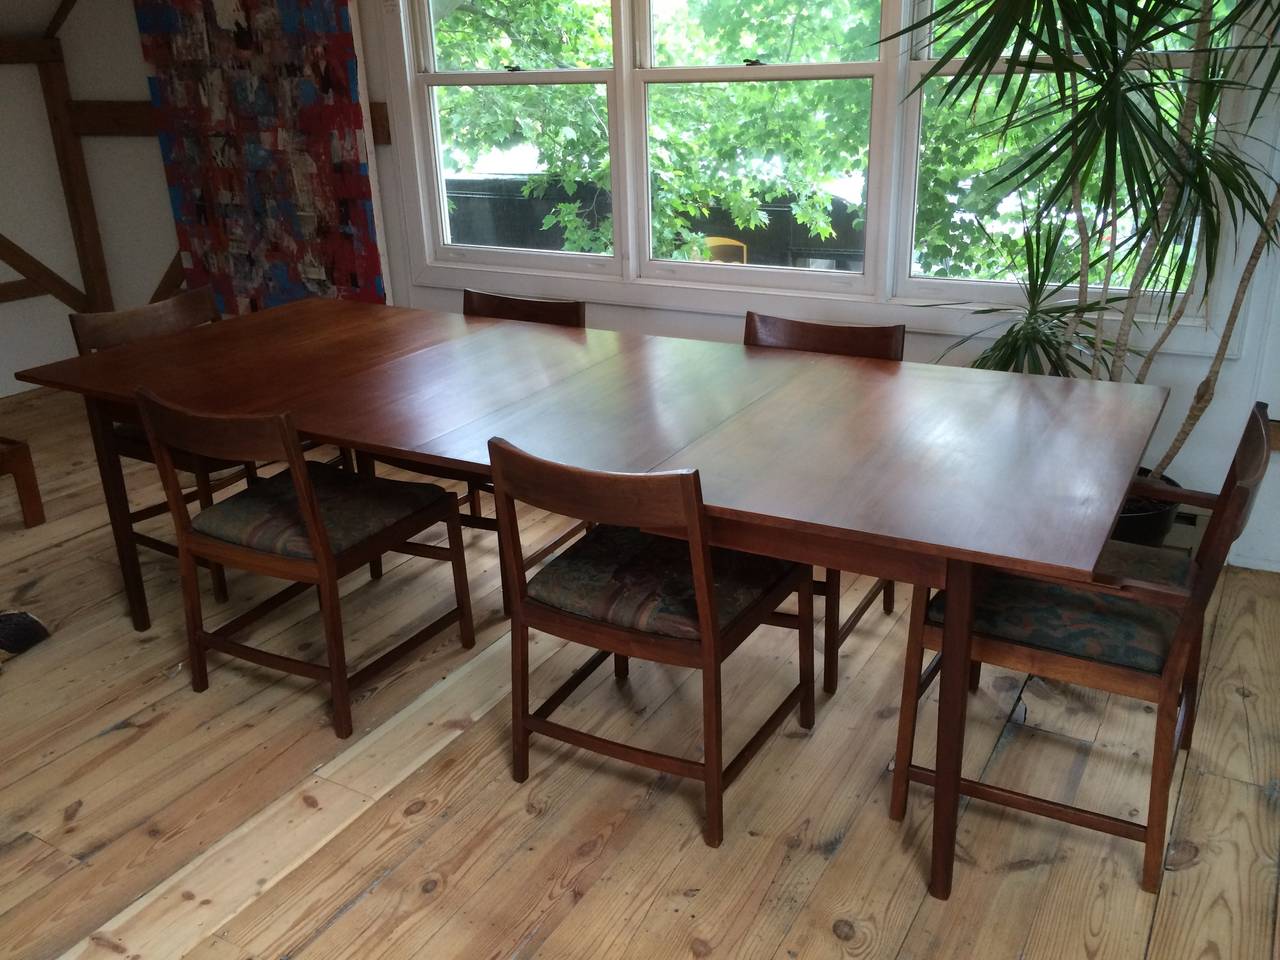 Extra wide Walnut dining table with two leaves and the six walnut dining chairs. We left the original fabric in place as it is pretty groovy.